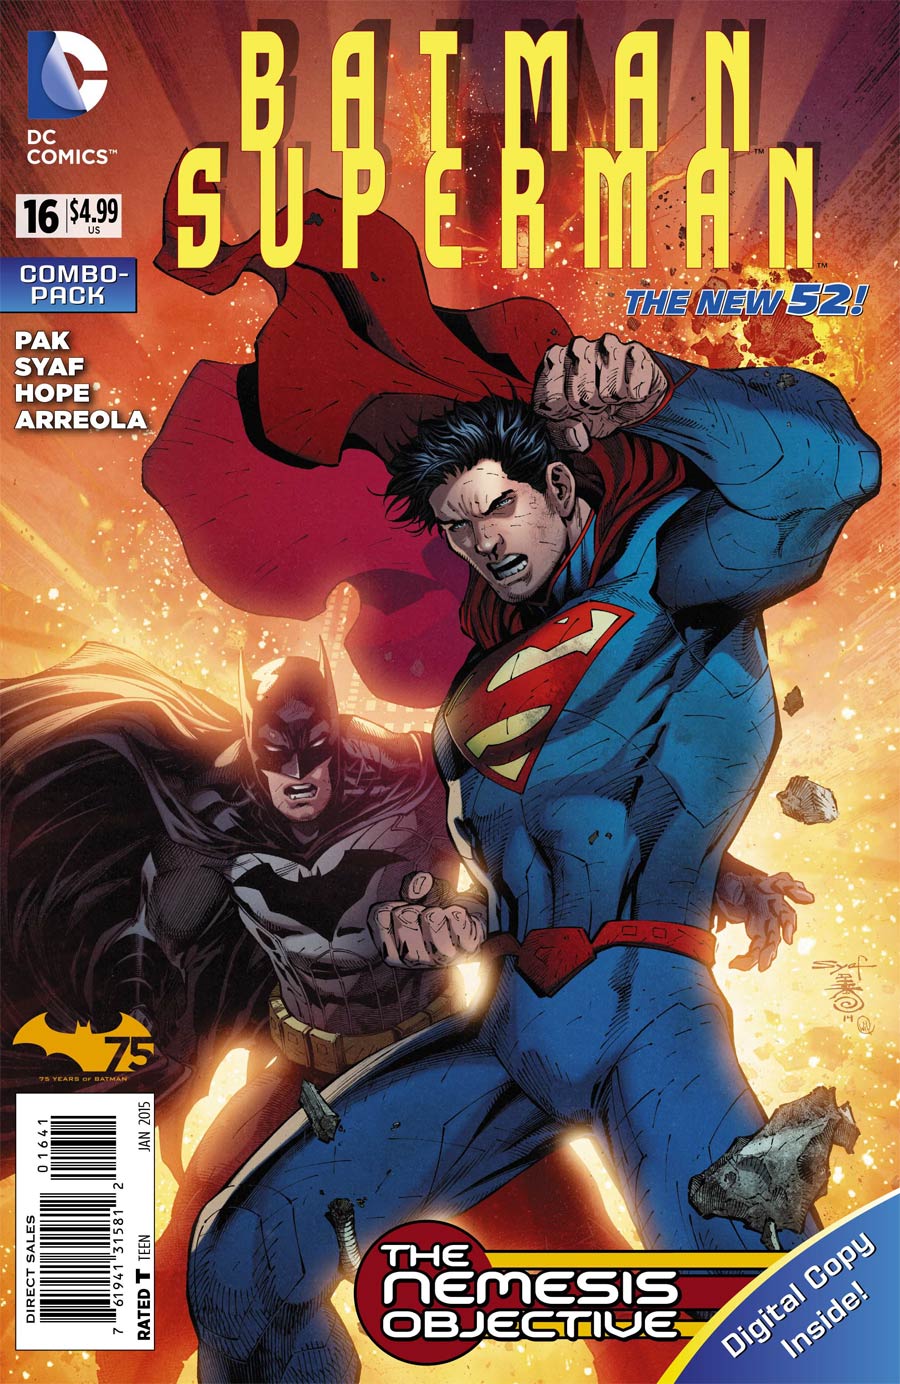 Batman Superman #16 Cover C Combo Pack With Polybag